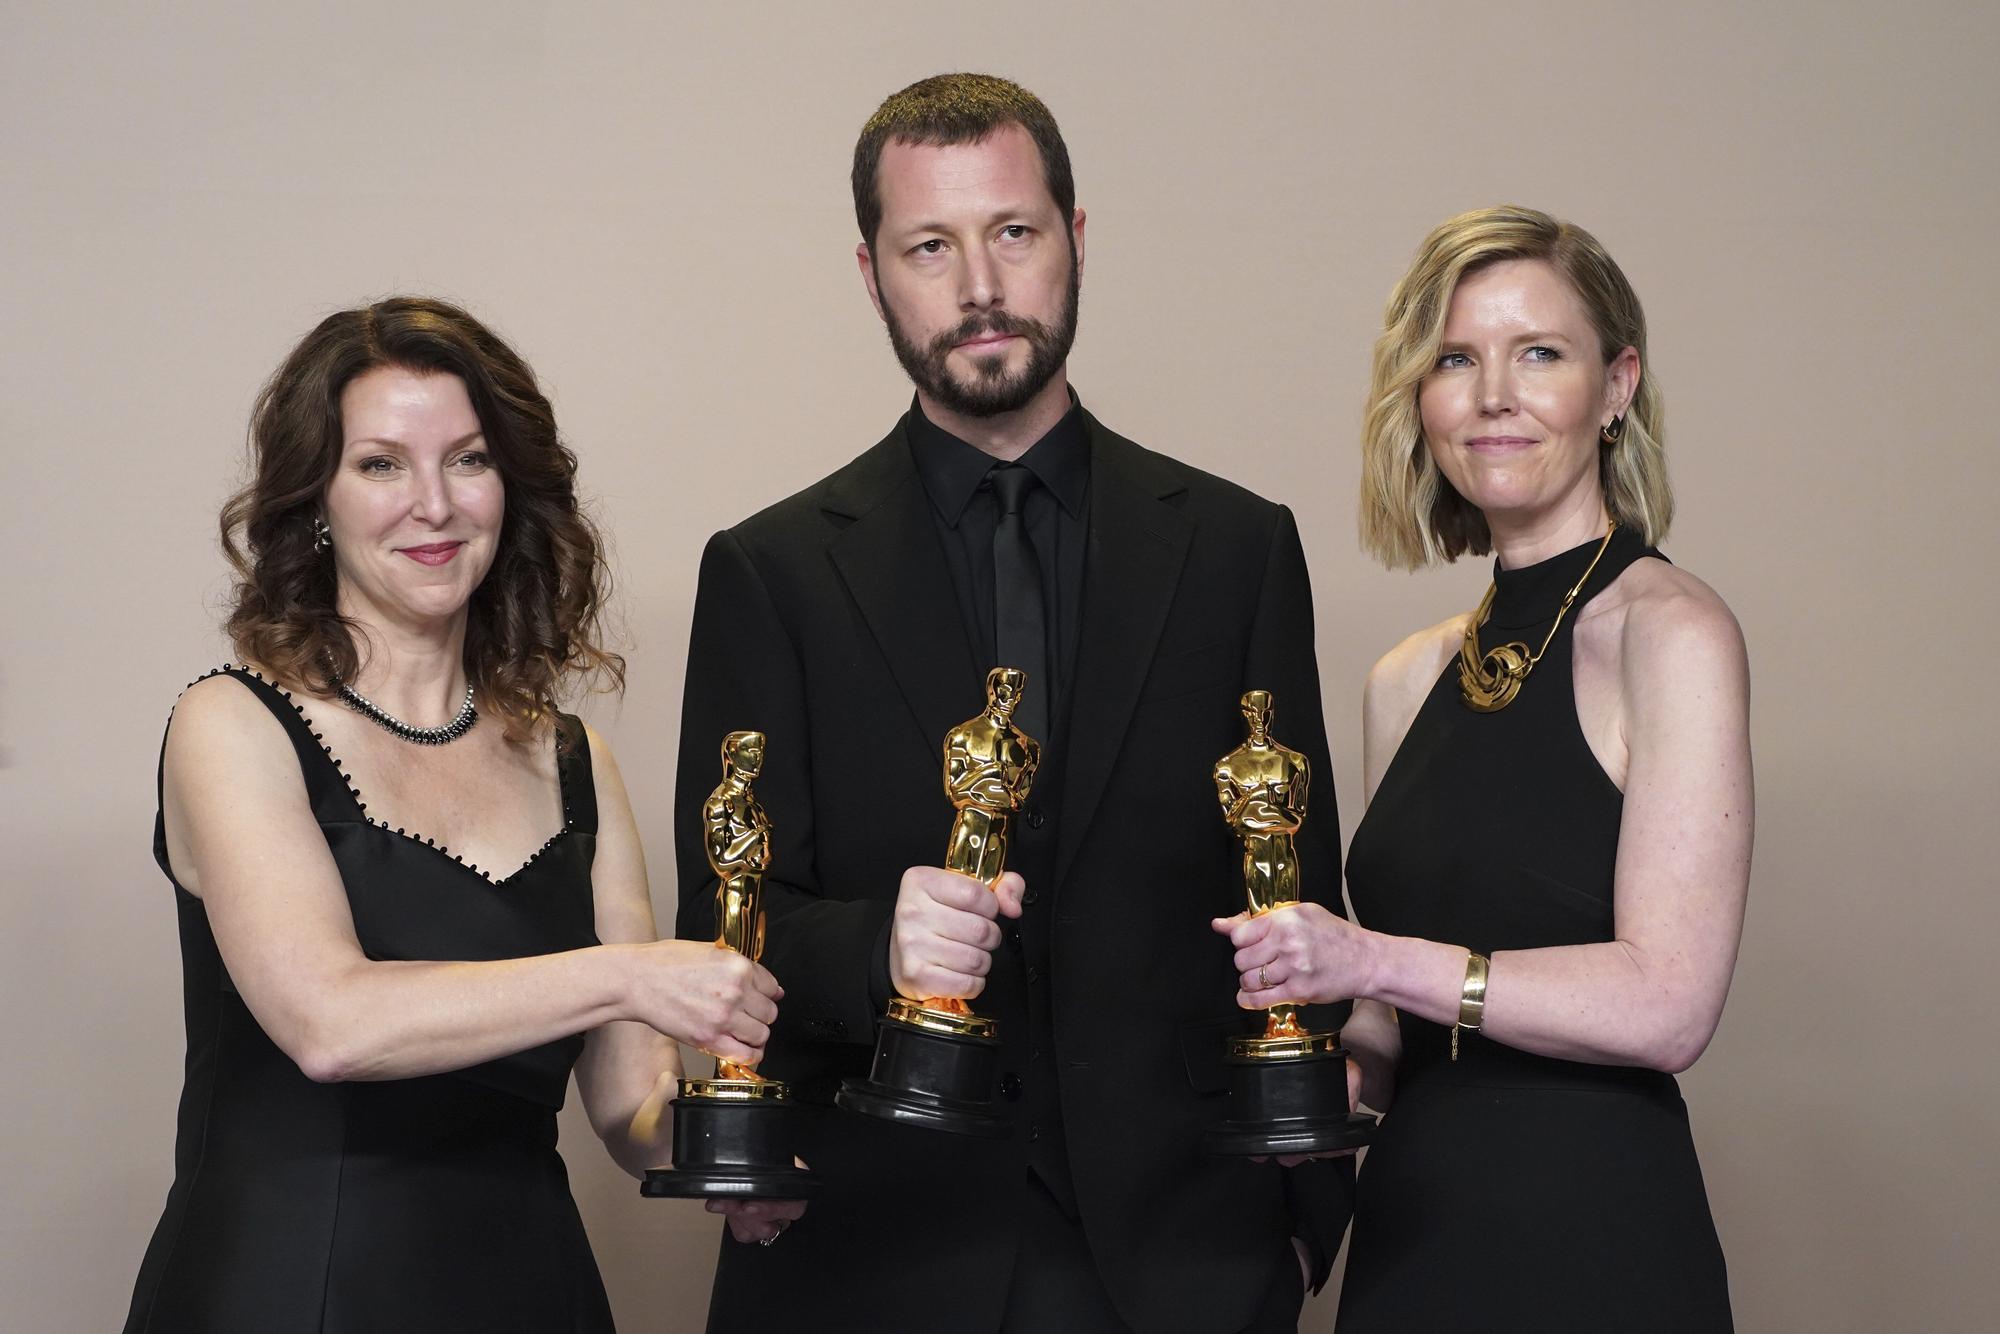 Raney Aronson-Rath, from left, Mstyslav Chernov, and Michelle Mizner pose in the press room with the award for best documentary feature film for "20 Days in Mariupol" at the Oscars on Sunday, March 10, 2024, at the Dolby Theatre in Los Angeles. (Photo by Jordan Strauss/Invision/AP) Associated Press/LaPresse Only Italy and Spain / EDITORIAL USE ONLY/ONLY ITALY AND SPAIN